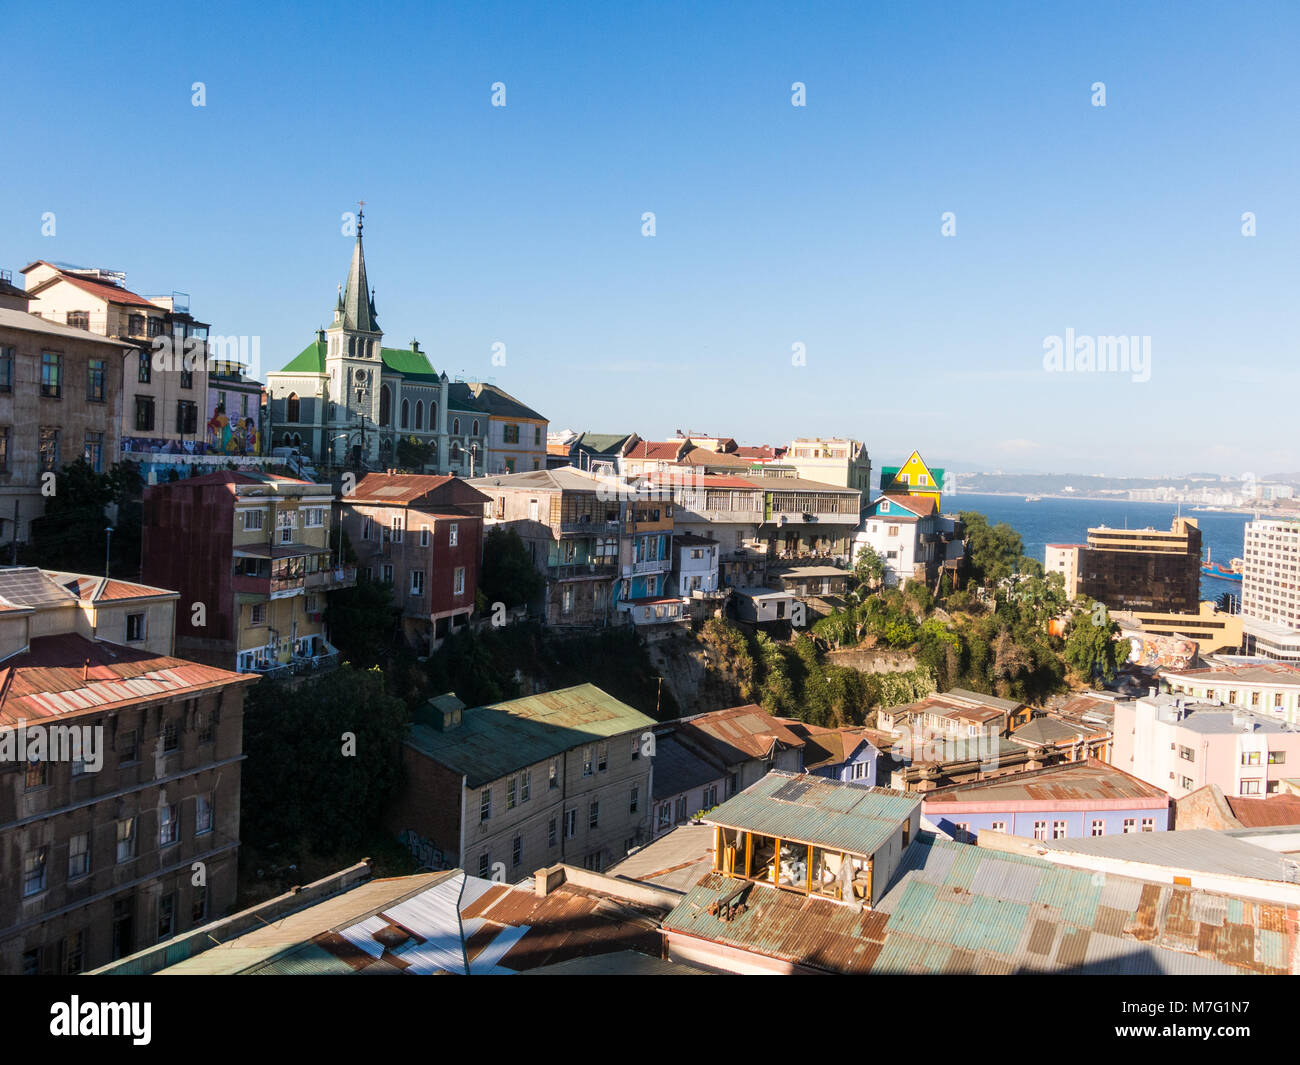 View on Cityscape of historical city Valparaiso, Chile. The colorful houses and hectic street in Valparaiso. It is the most important seaport in Chile Stock Photo